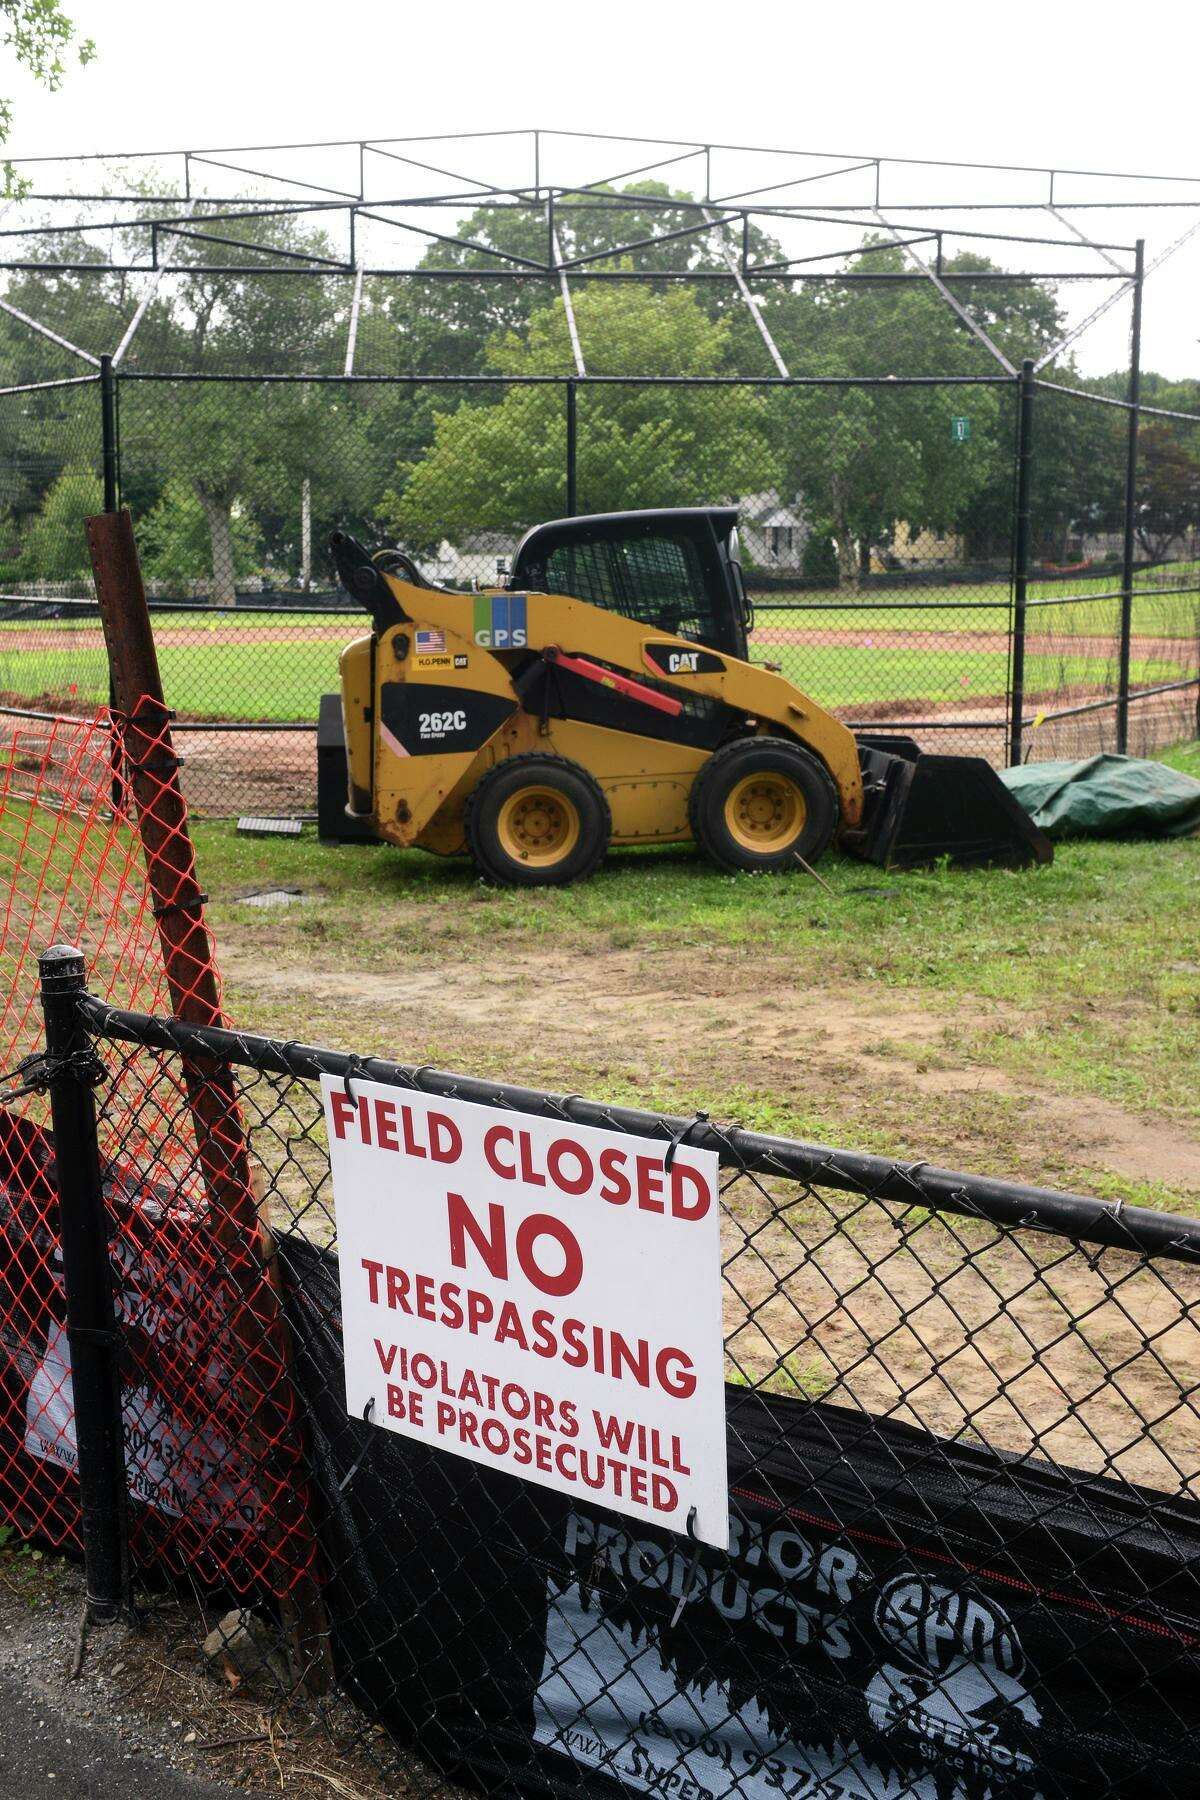 The remediation and improvement project is underway at Gould Manor Park, in Fairfield, Conn. Aug. 10, 2021.